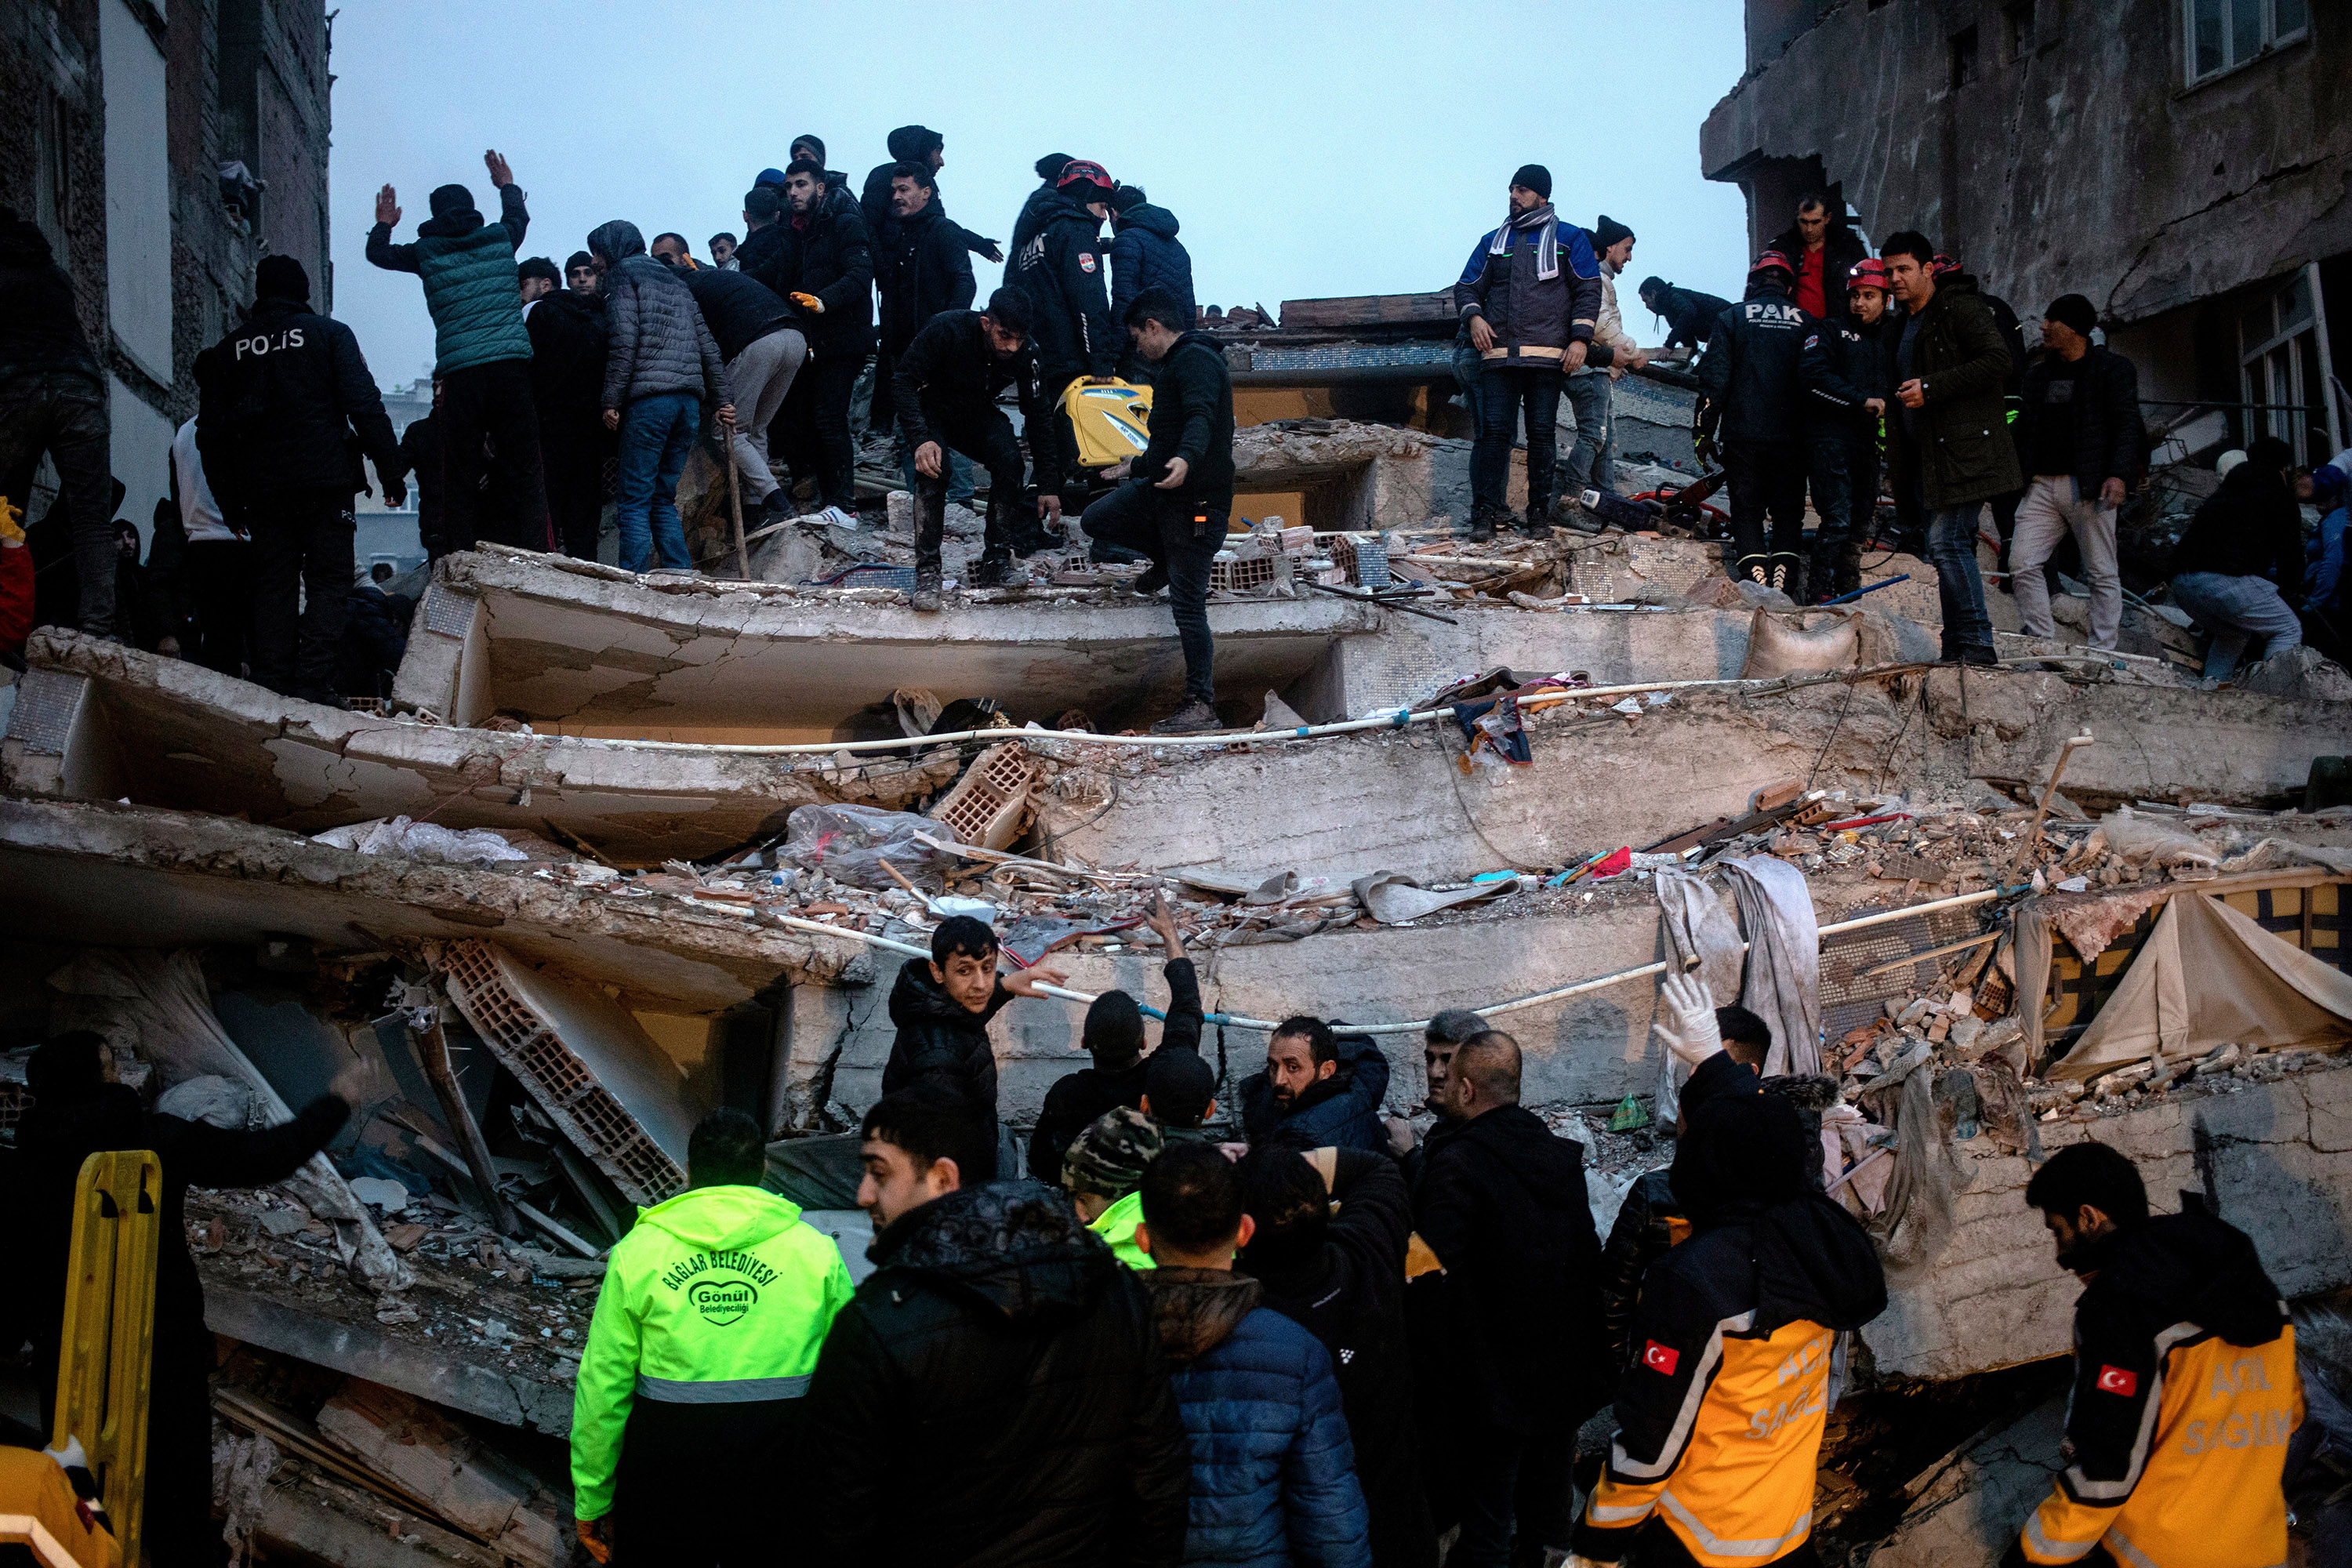 Mandatory Credit: Photo by REFIK TEKIN/EPA-EFE/Shutterstock (13755723f)Turkish emergency personnel and others try to help victims at the site of a collapsed building after an earthquake in Diyarbakir, Turkey 06 February 2023. According to the US Geological Service, an earthquake with a preliminary magnitude of 7.8 struck southeast Turkey close to the Syrian border. The earthquake caused buildings to collapse and sent shockwaves over northwest Syria, Cyprus, and Lebanon.Earthquake in southeast Turkey, Diyarbakir - 06 Feb 2023